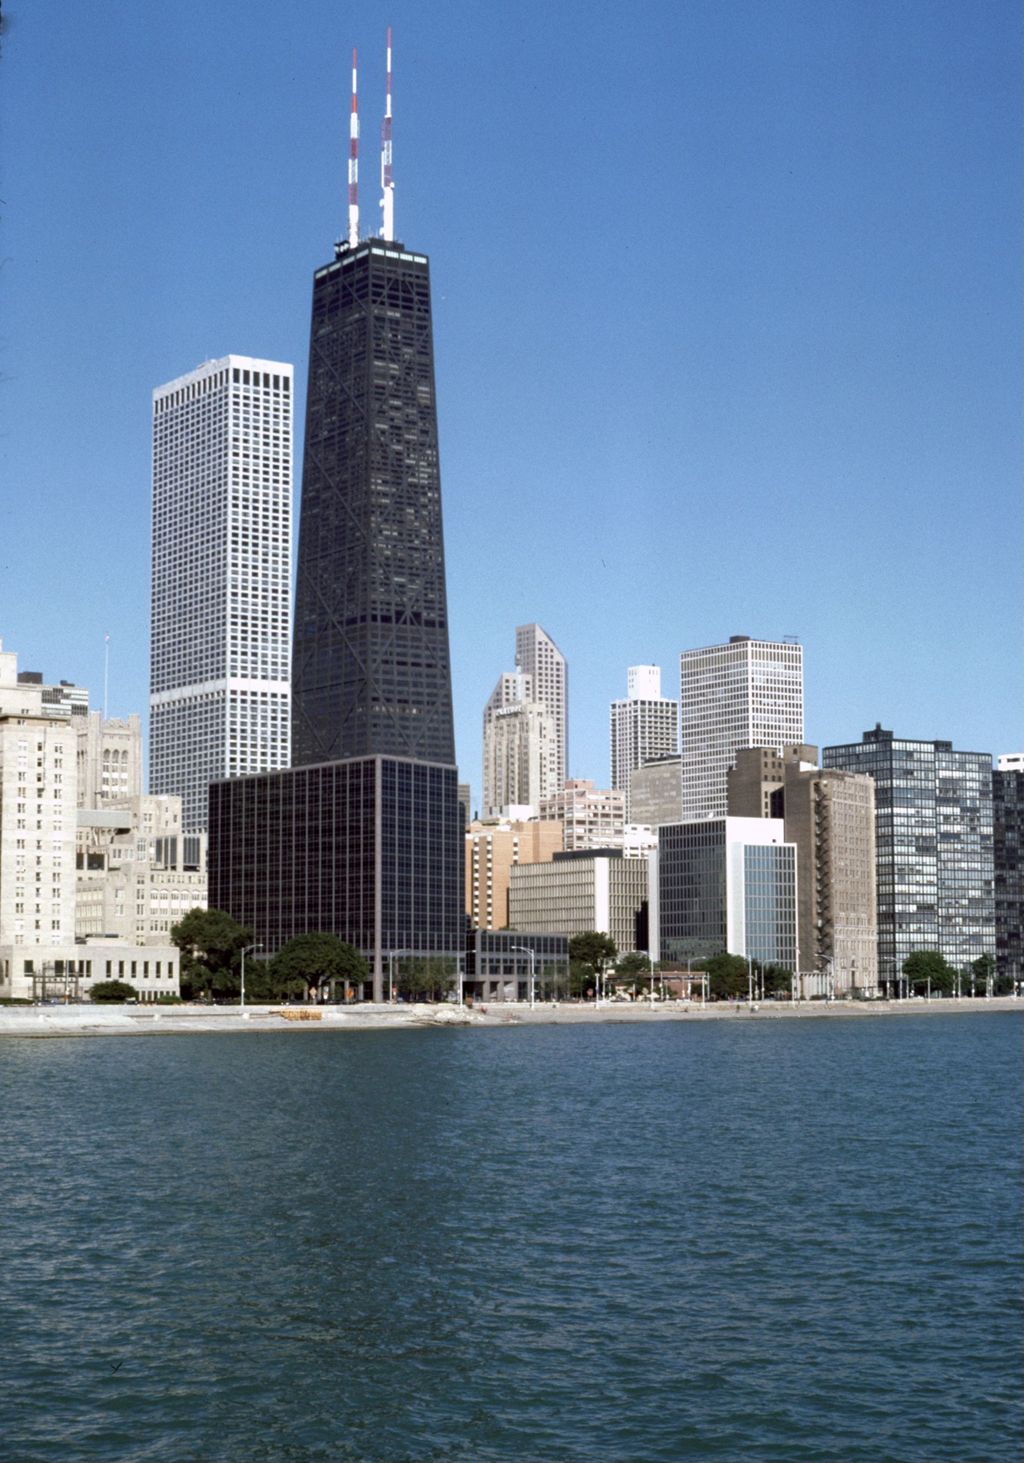 Near North Side skyline from the lakefront